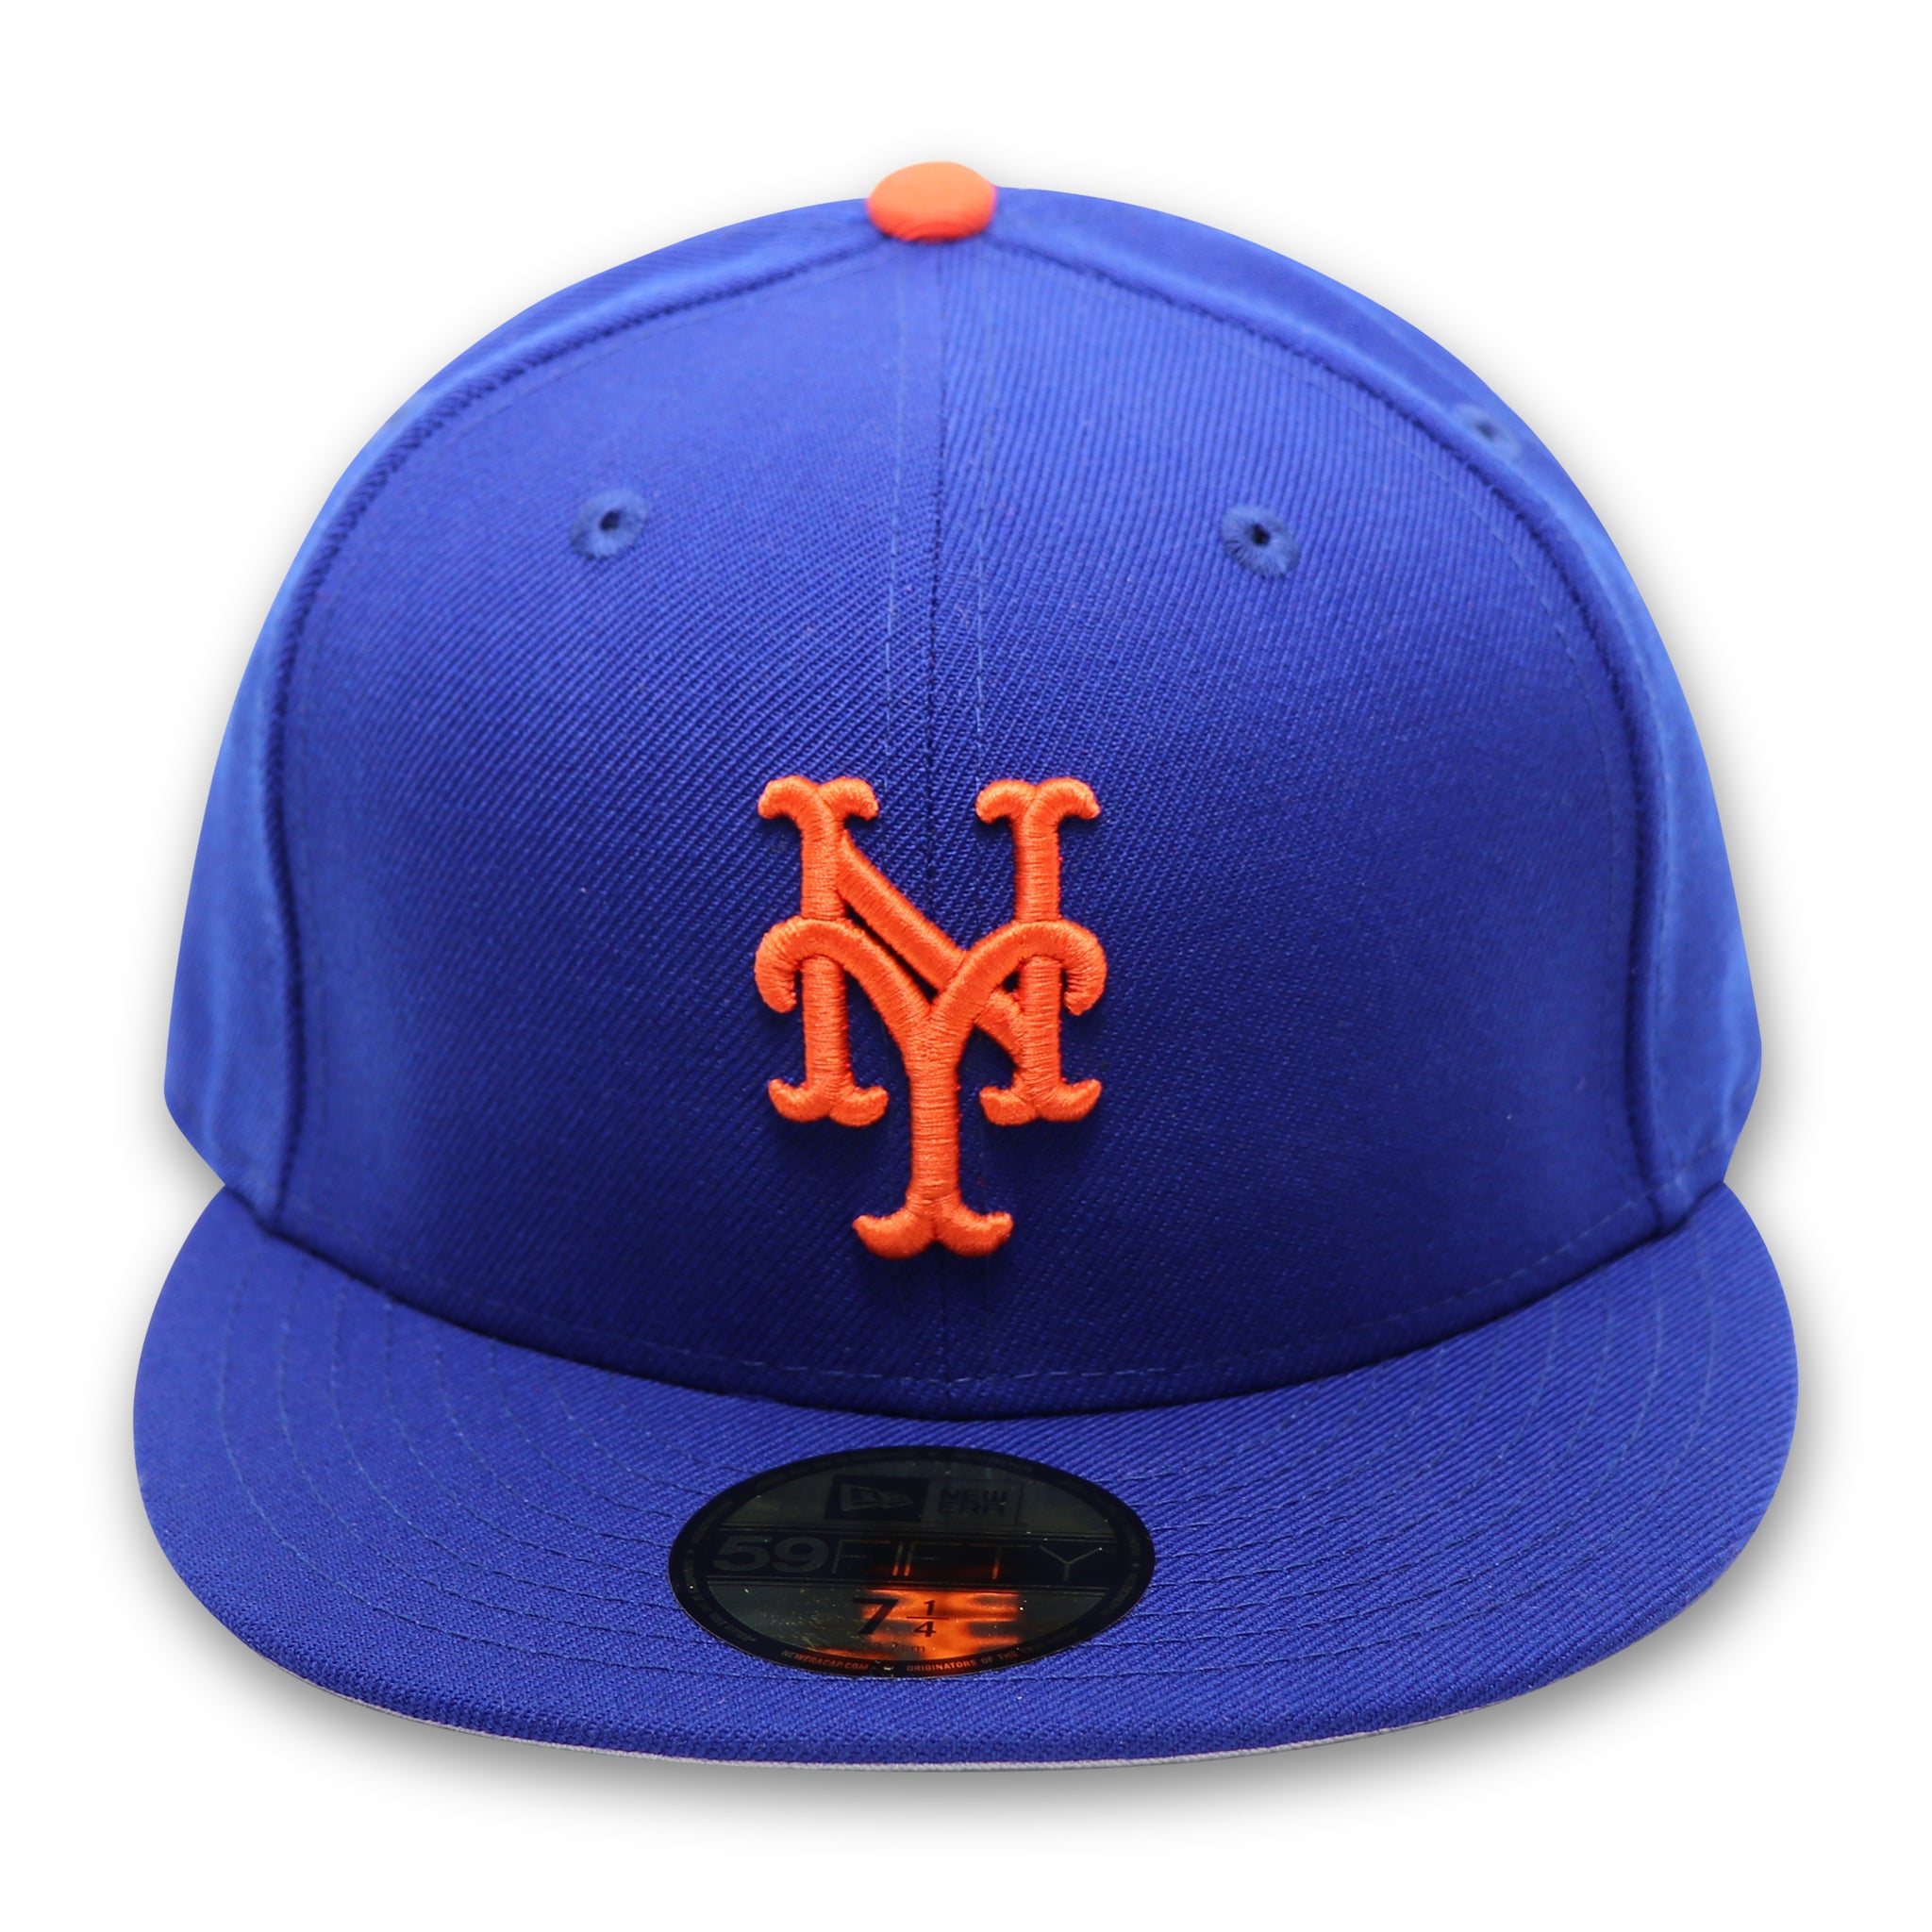 NEW YORK METS (ROYAL) (2000-2006 HOME) NEW ERA 59FIFTY FITTED